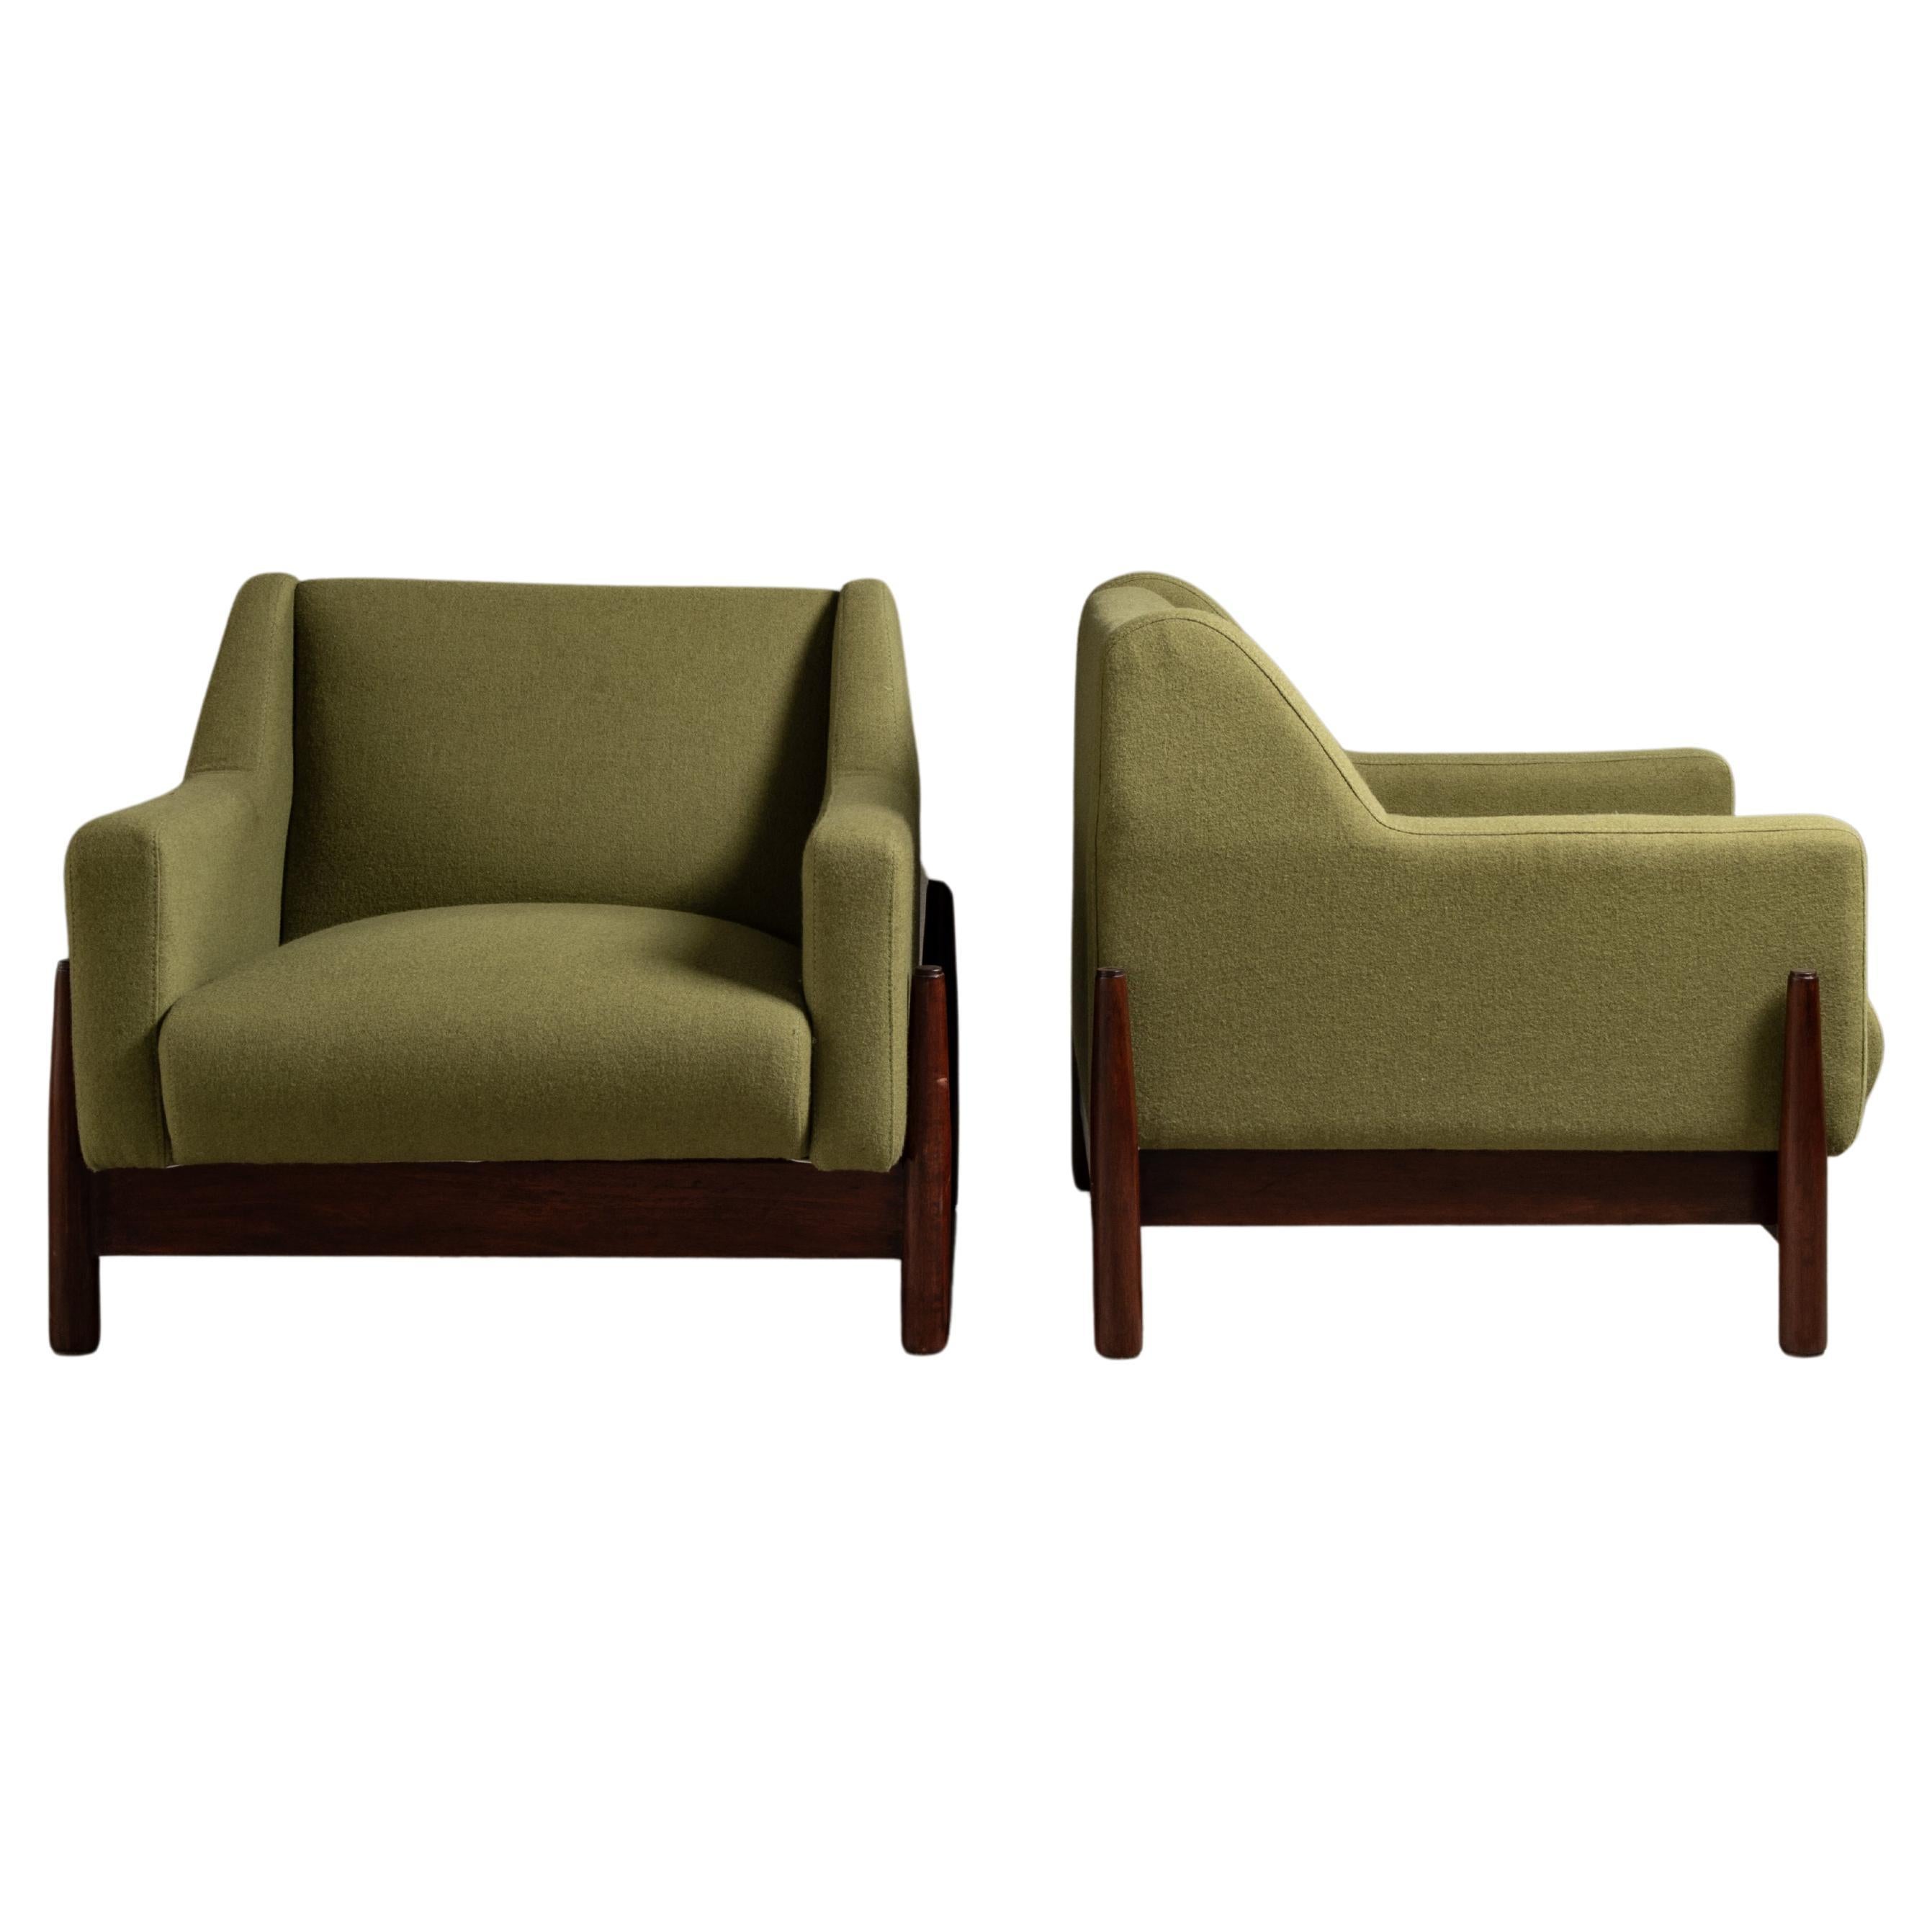 Pair of Green Lounge Chairs, by Móveis Cimo, Brazilian Mid-Century Design 